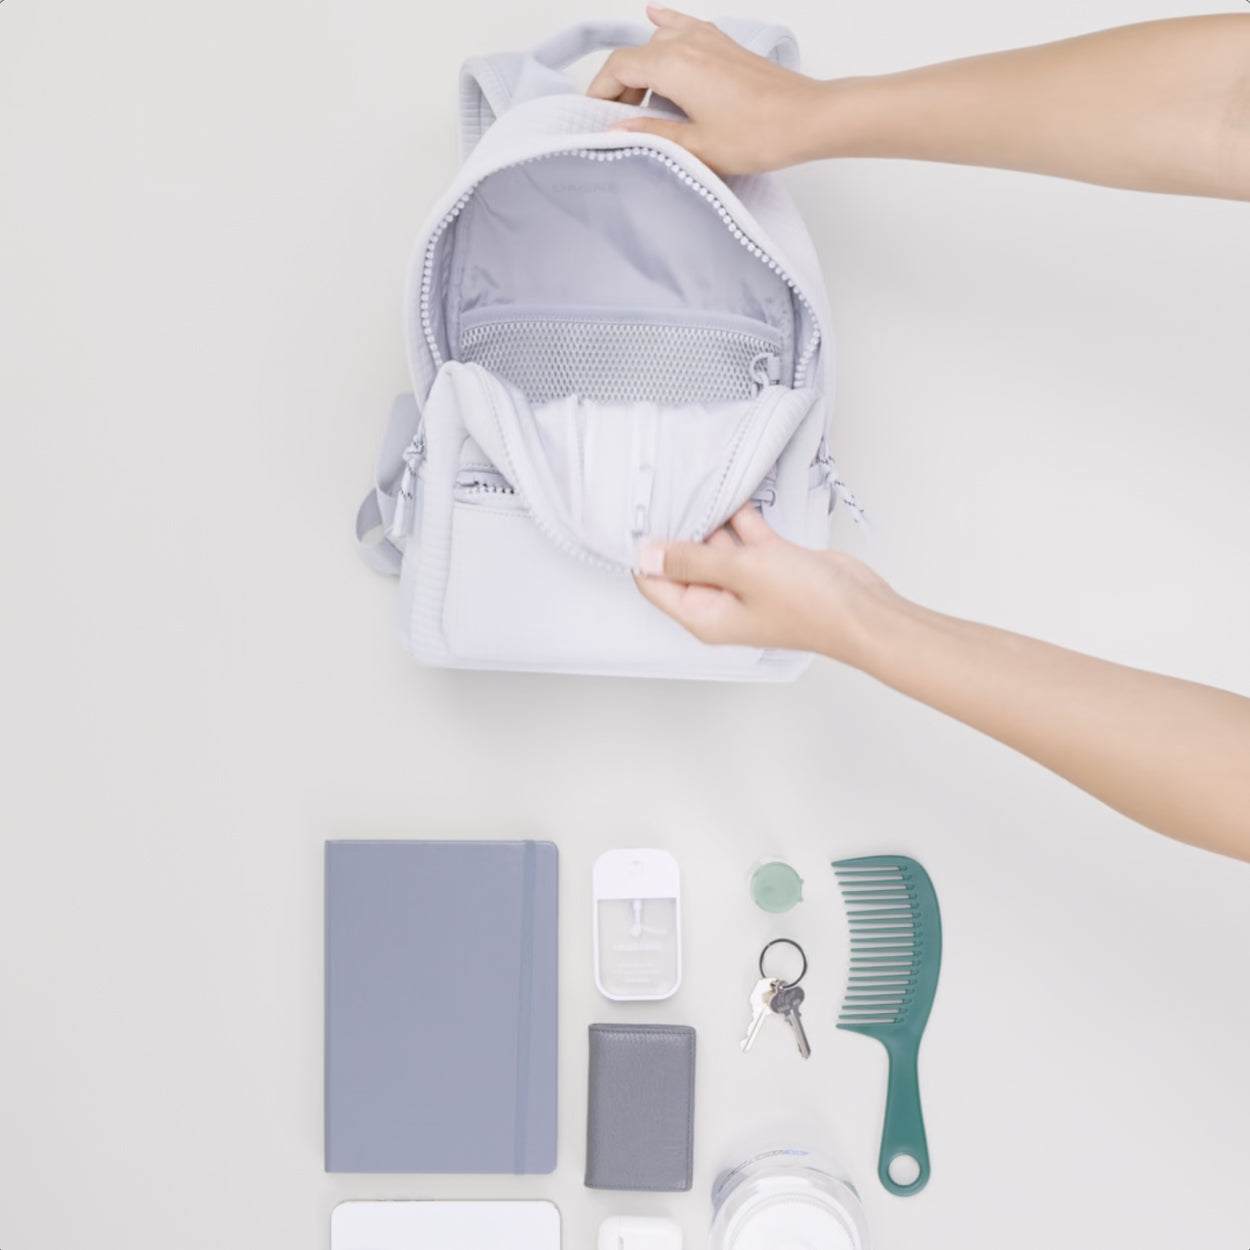 Dagne Dover - The Dakota backpacks come with thick elastic bands on the  side pocket, designed to keep your water bottle in place and easy to grab  on the move. #365